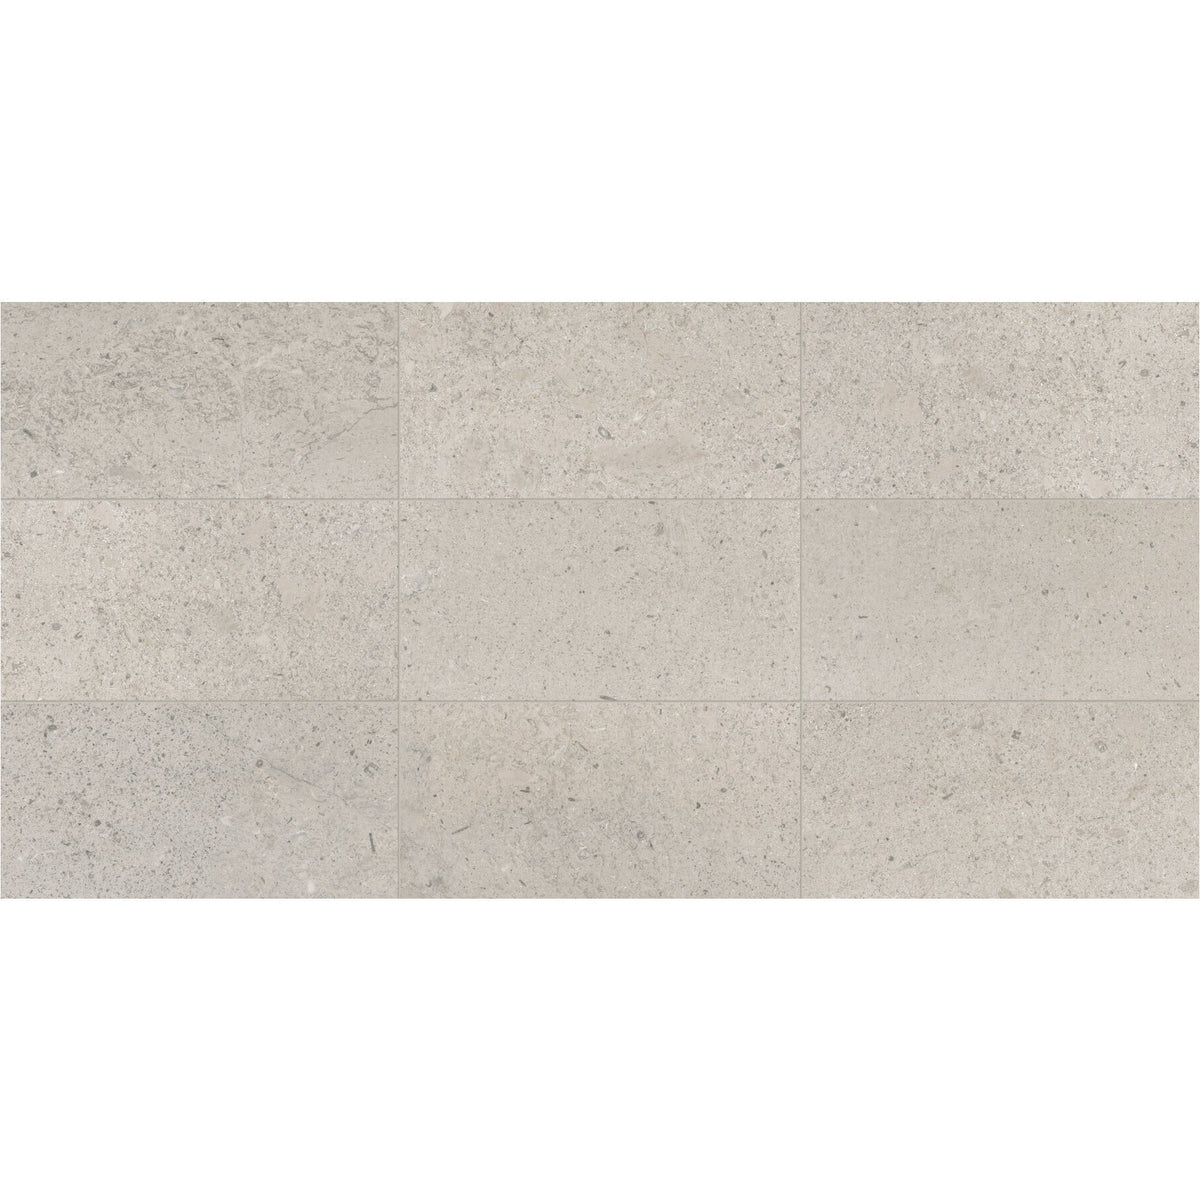 Daltile - Center City - 4 in. x 12 in. Natural Stone - Delancey Grey Honed